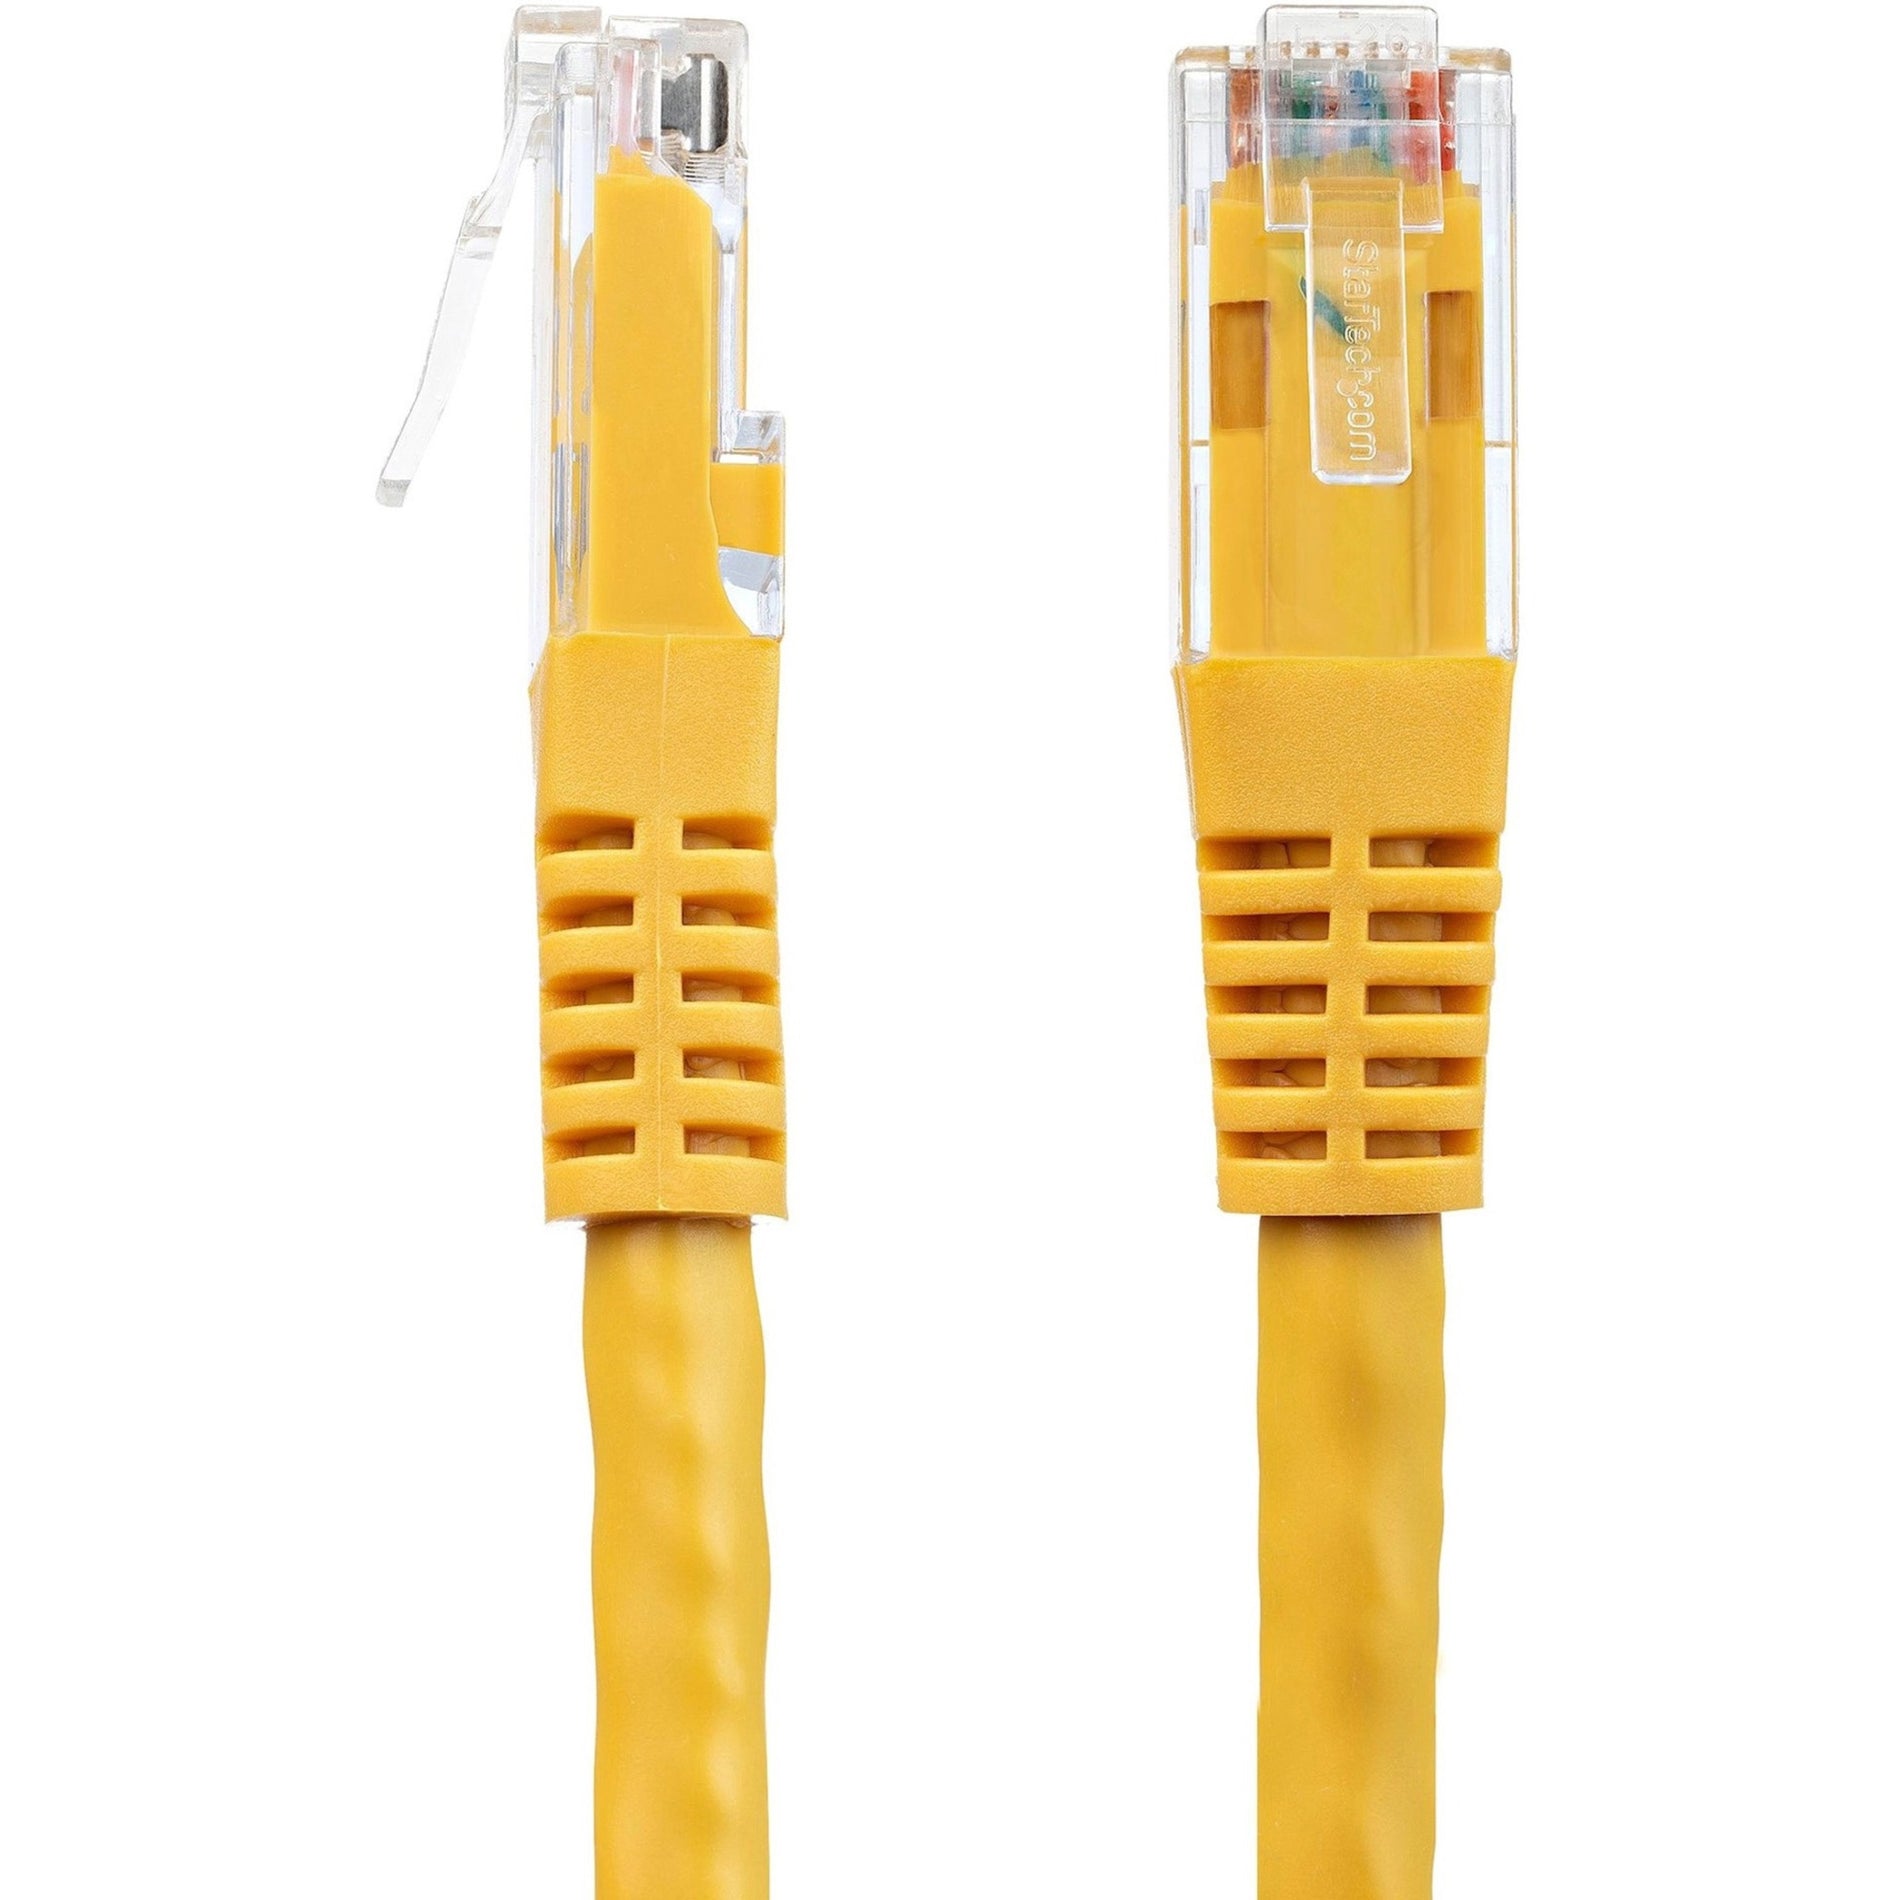 StarTech.com C6PATCH5YL 5ft Yellow Cat6 UTP Patch Cable, ETL Verified, 10 Gbit/s Data Transfer Rate